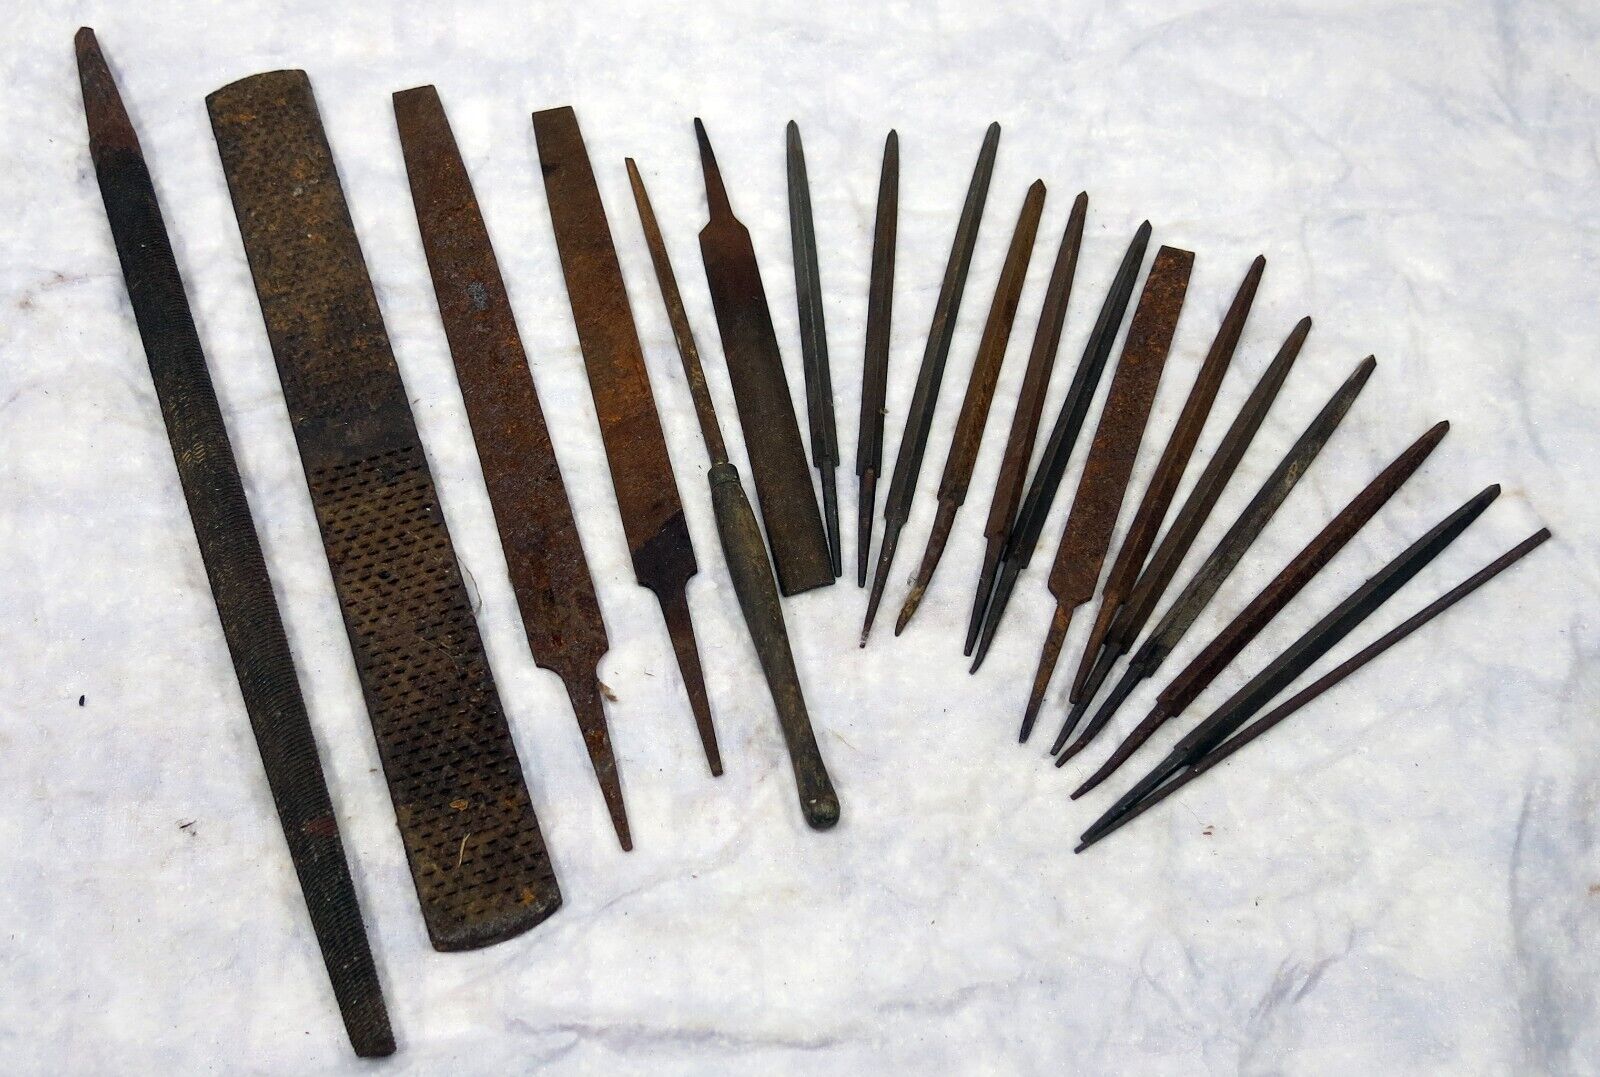 Antique or vintage wood/metalworking files and rasps 19 piece lot